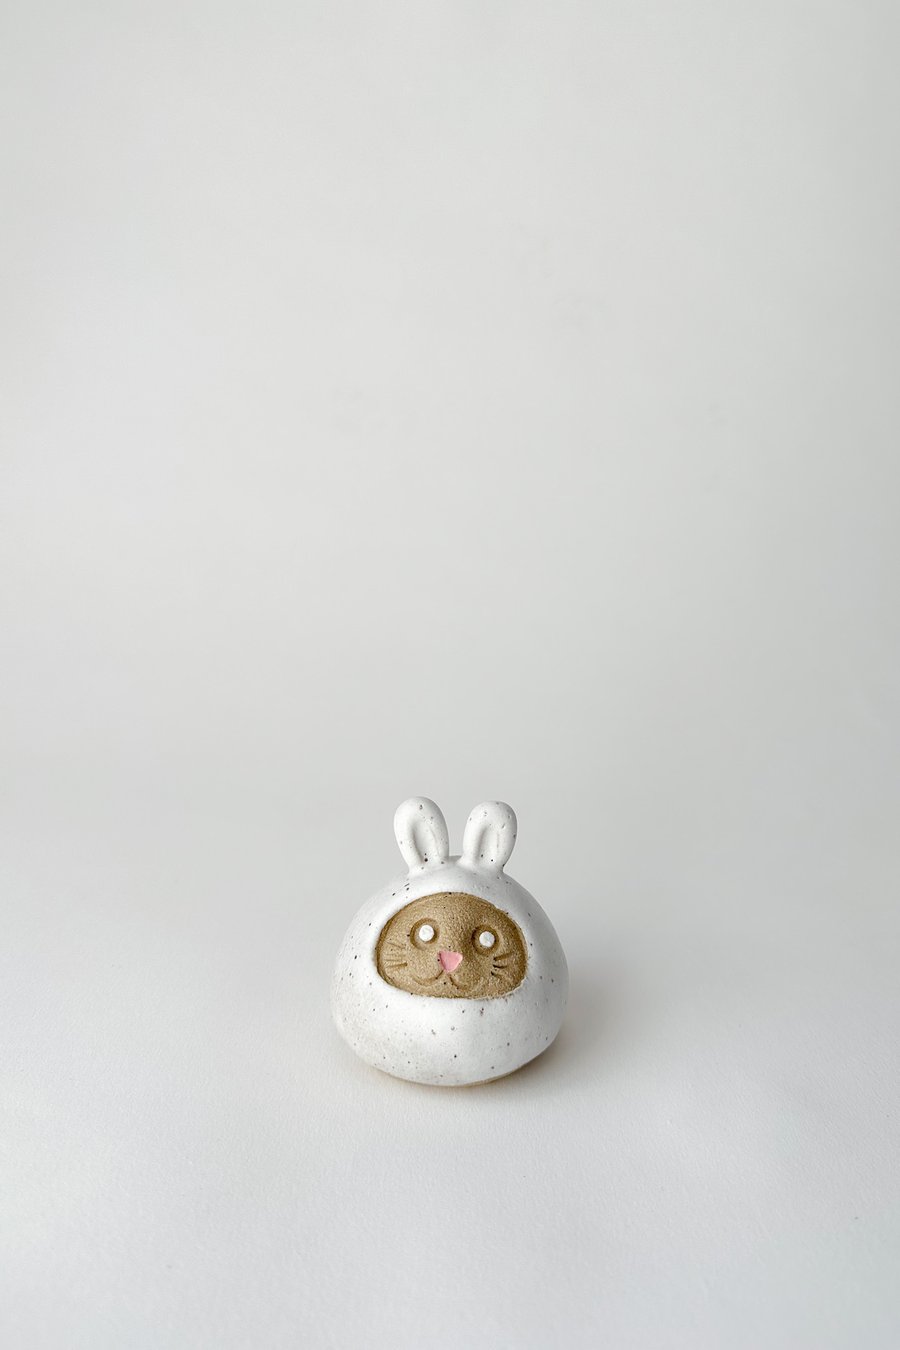 Image of Lunar New Year Bunny Daruma Wishing doll - Matte Speckled White *ON SALE*